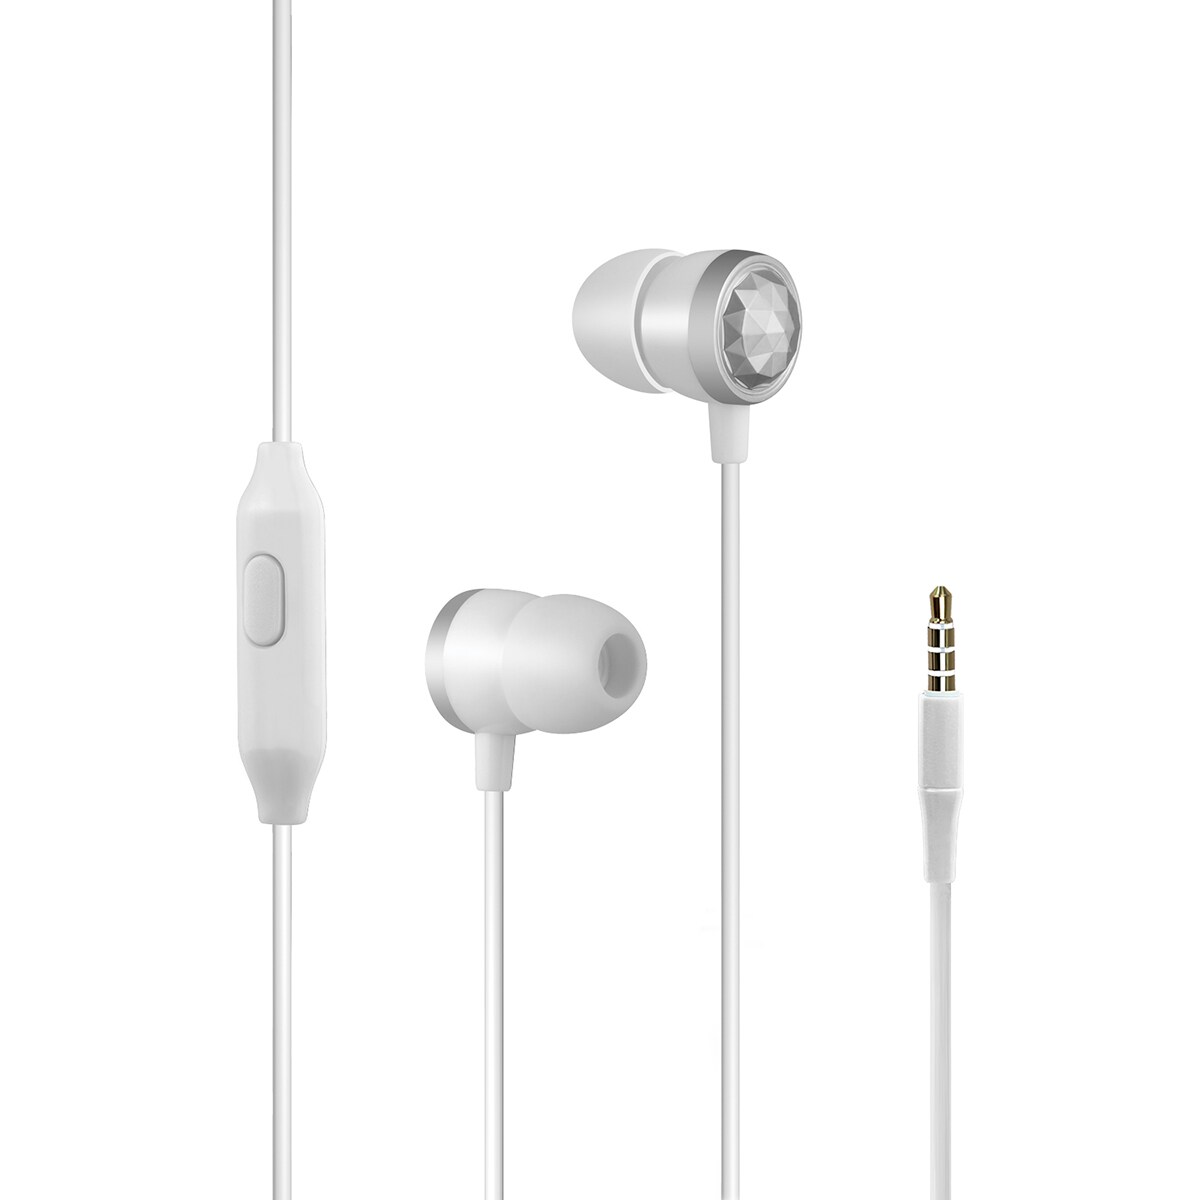 Premium Stereo In-Ear Headphones with Noise Cancelling Promate Wired Earphones